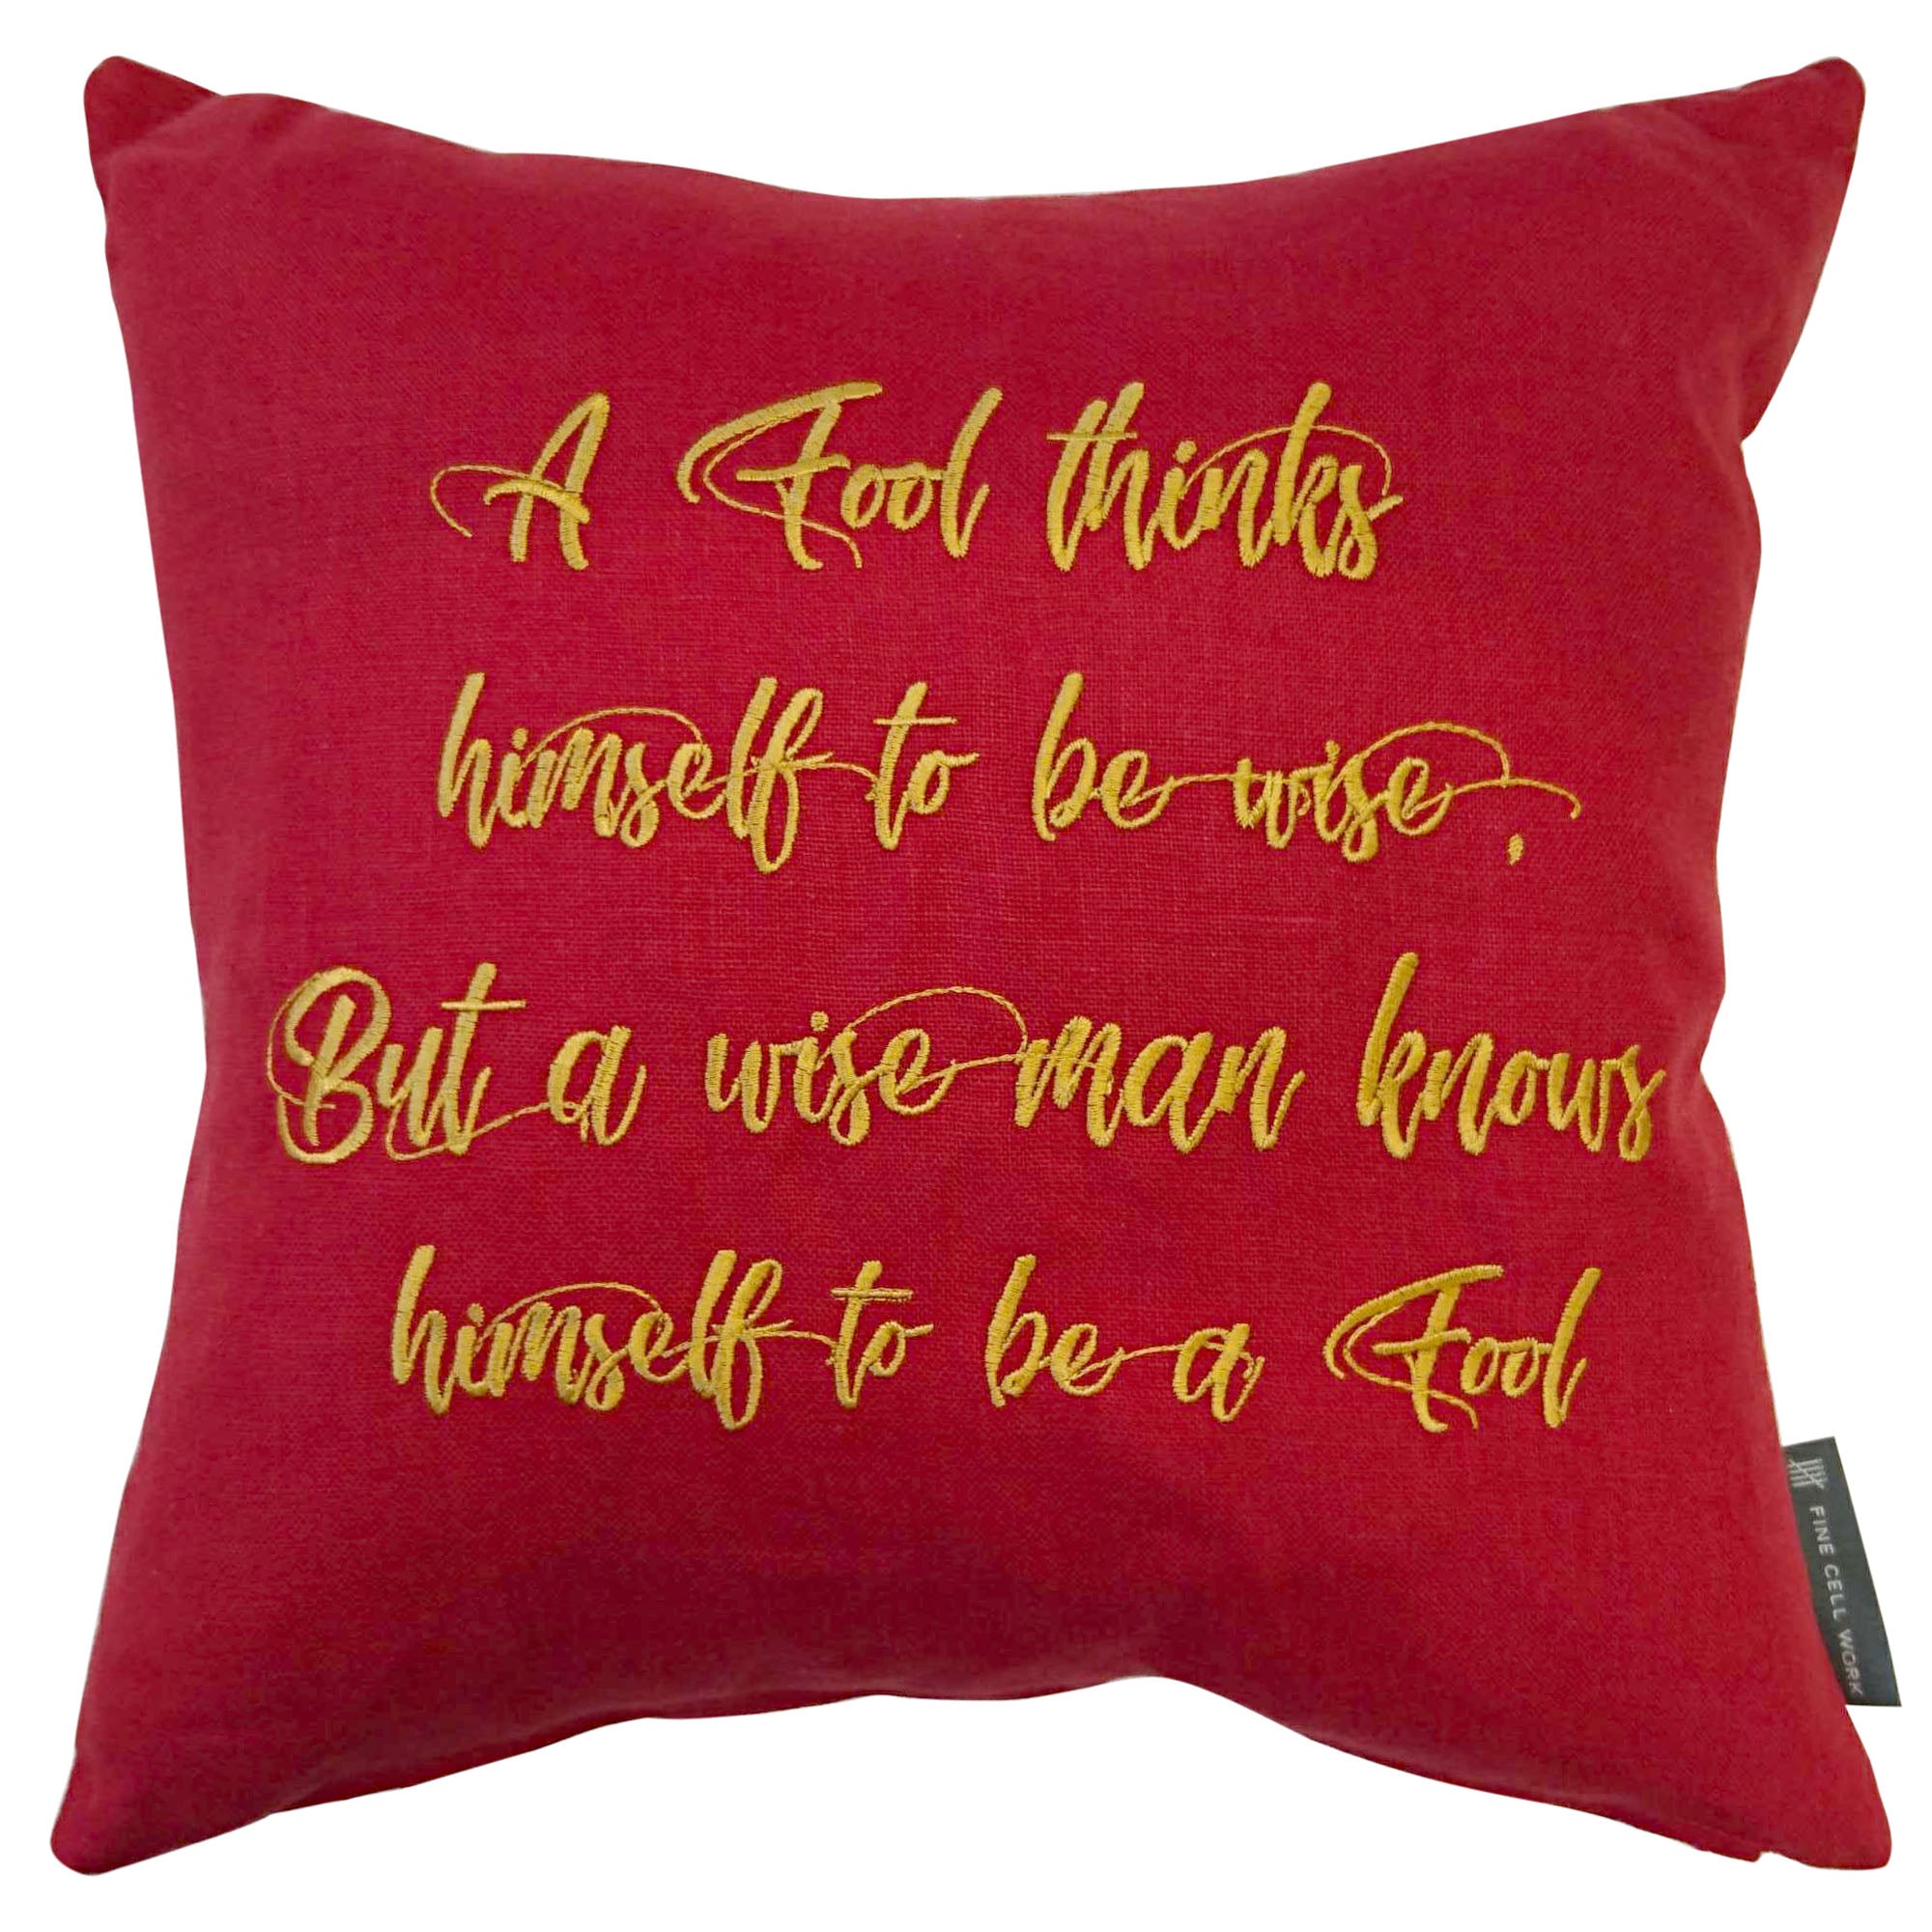 Dominic Cooper Shakespeare Quote 'A wise man knows himself to be a fool' Cushion